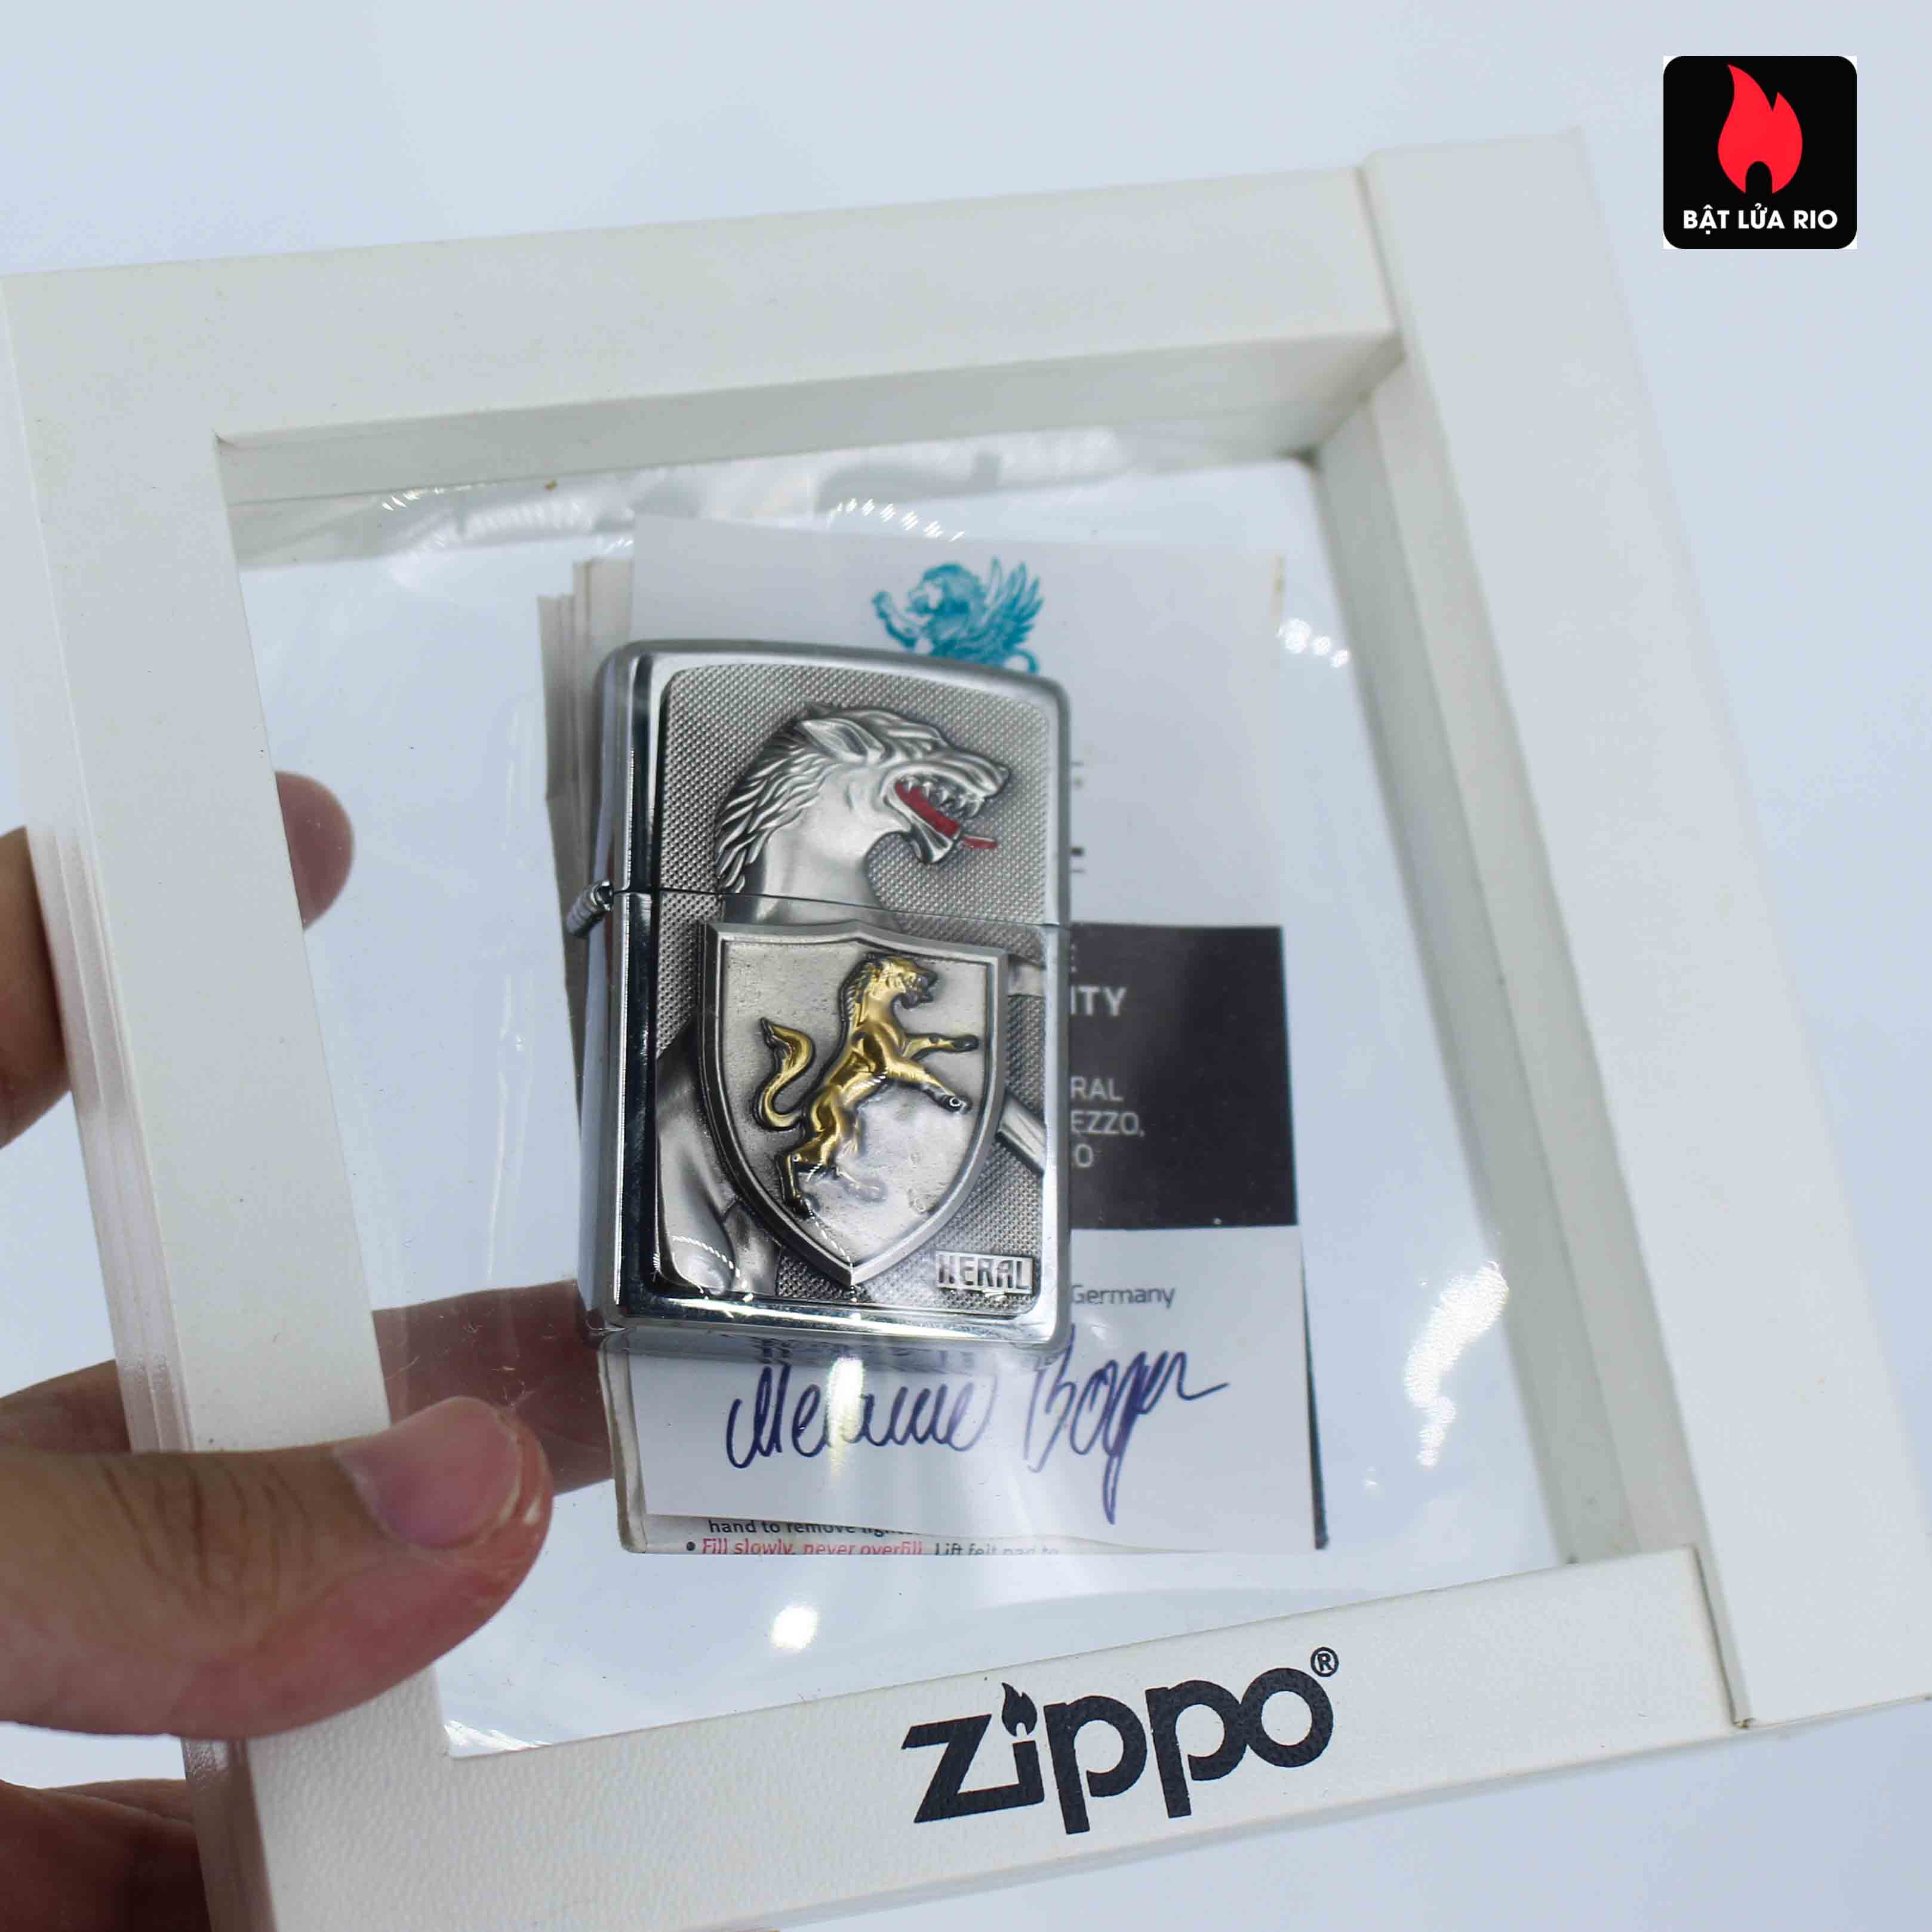 Zippo Set 2014 - Collectible Europe Animal Heral Arco Zippo Lighter Limited Edition 2